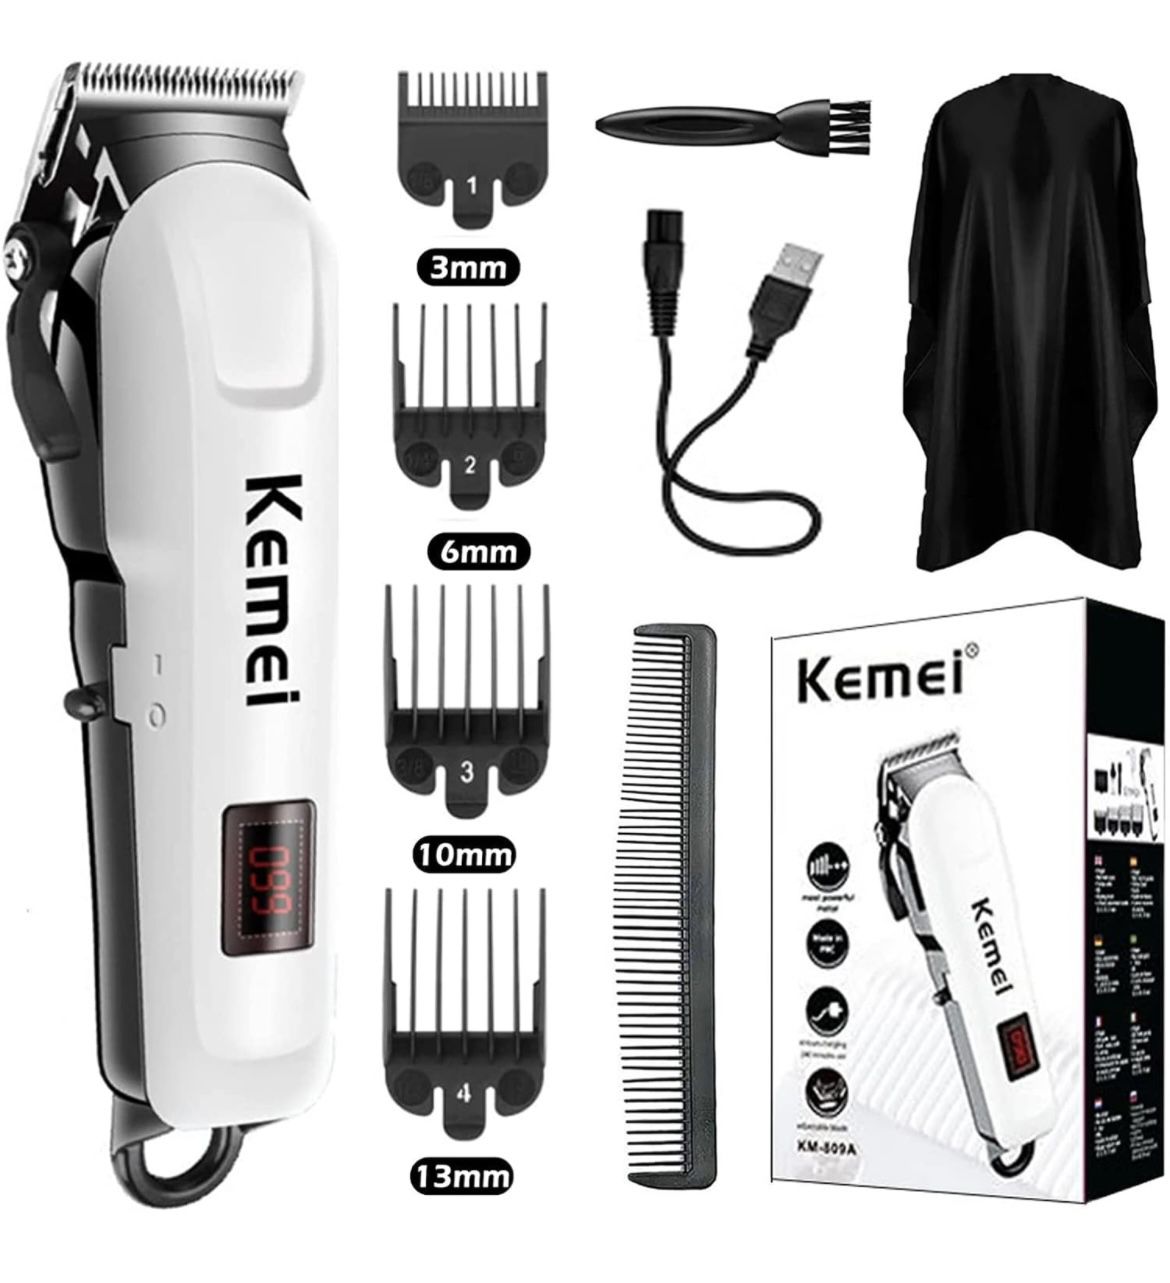 KEMEI Hair Clipper for Men Professional Cordless Electric Rechargeable Hair/Beard Trimmers for Men, Self Hair Cutting Haircut Kit, Adjustable Barber C